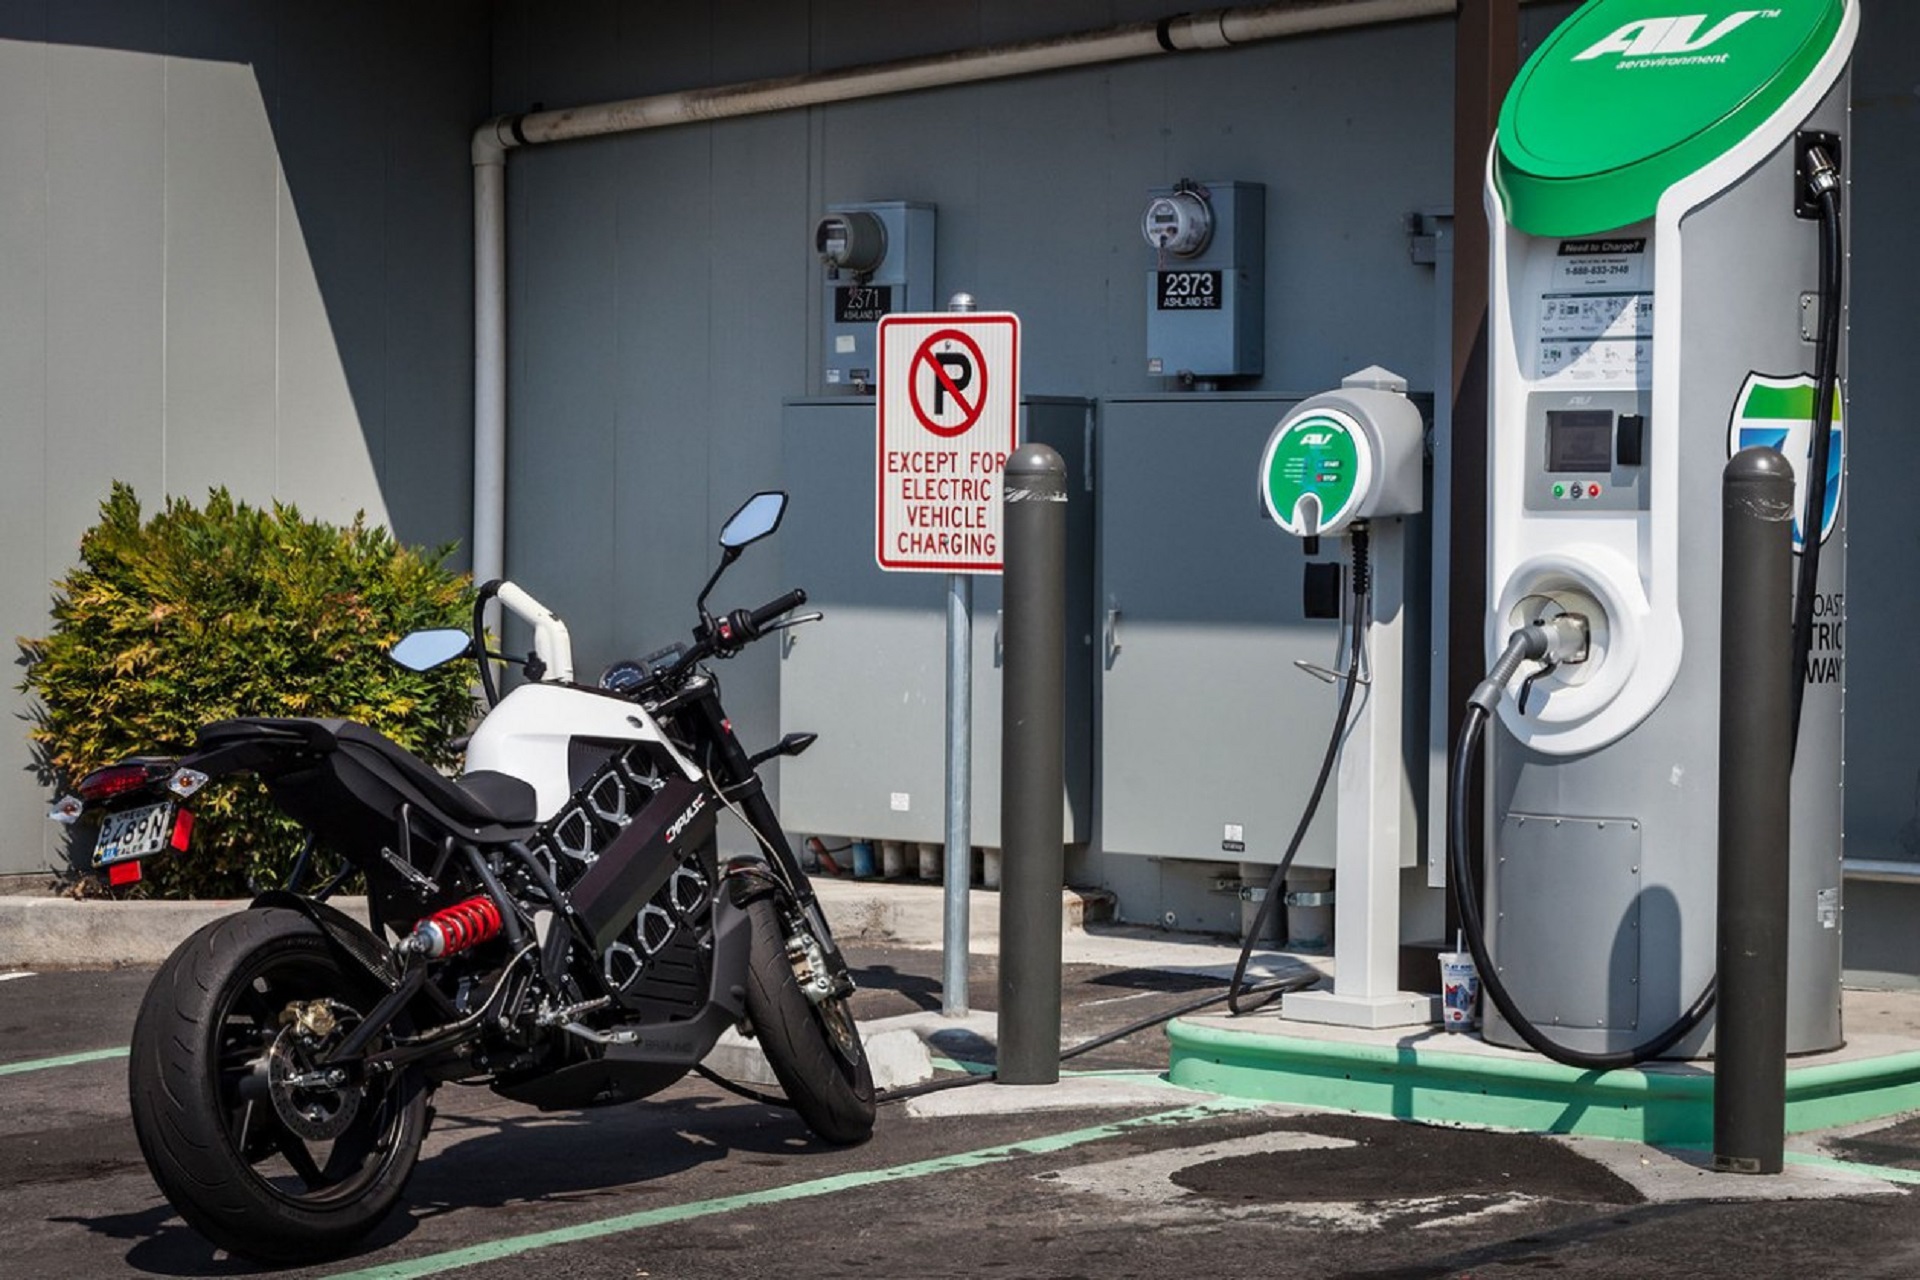 Hero MotoCorp & BPCL To Set Up 2-Wheeler Electric Vehicle Charging Stations